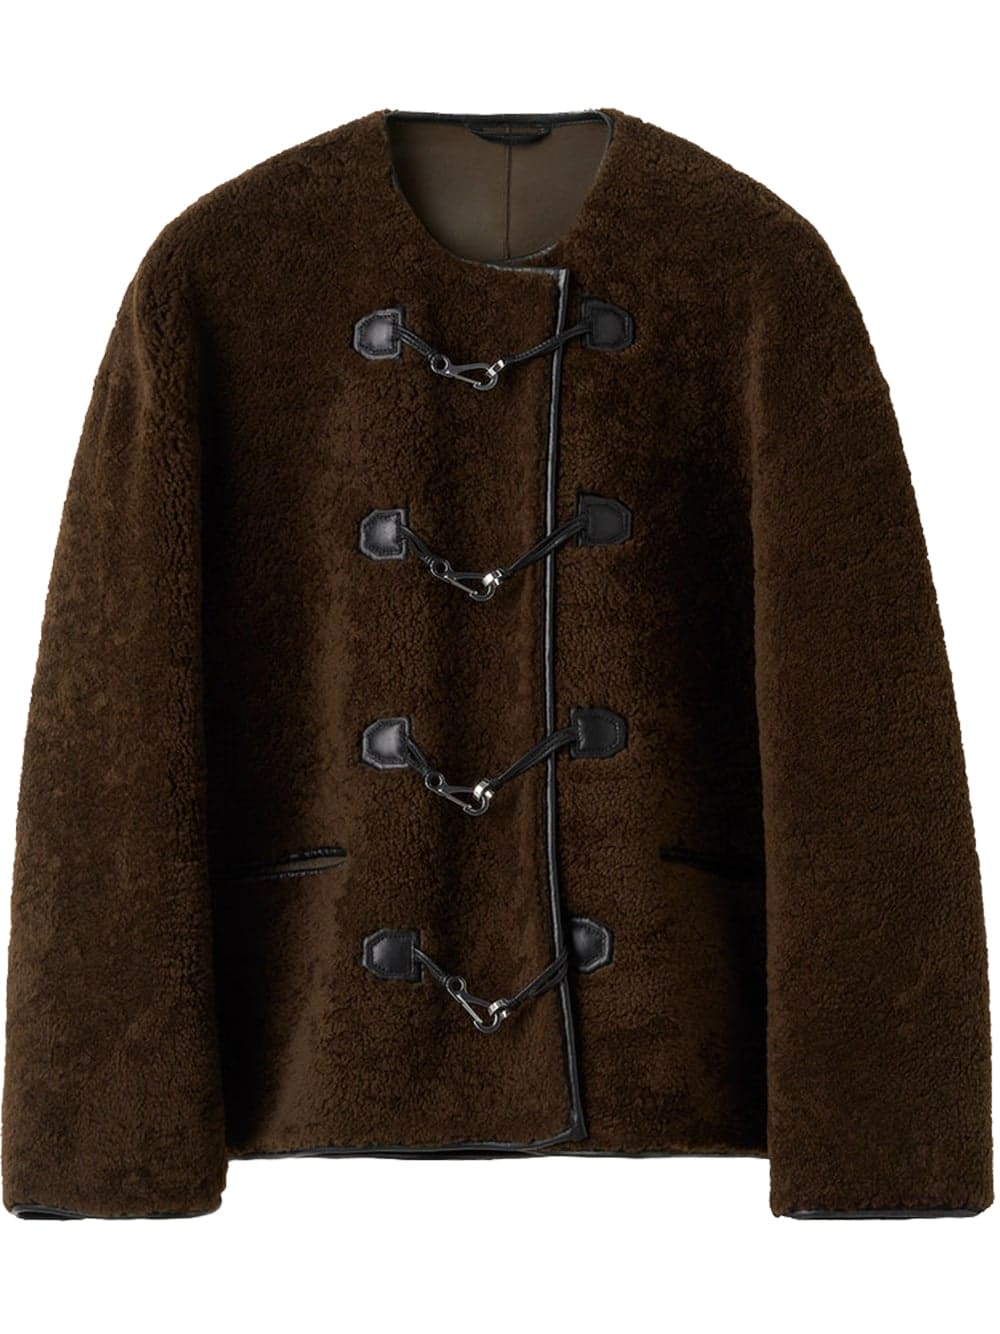 Toteme Teddy shearling jacket Saddle brown (Size: M/L) product